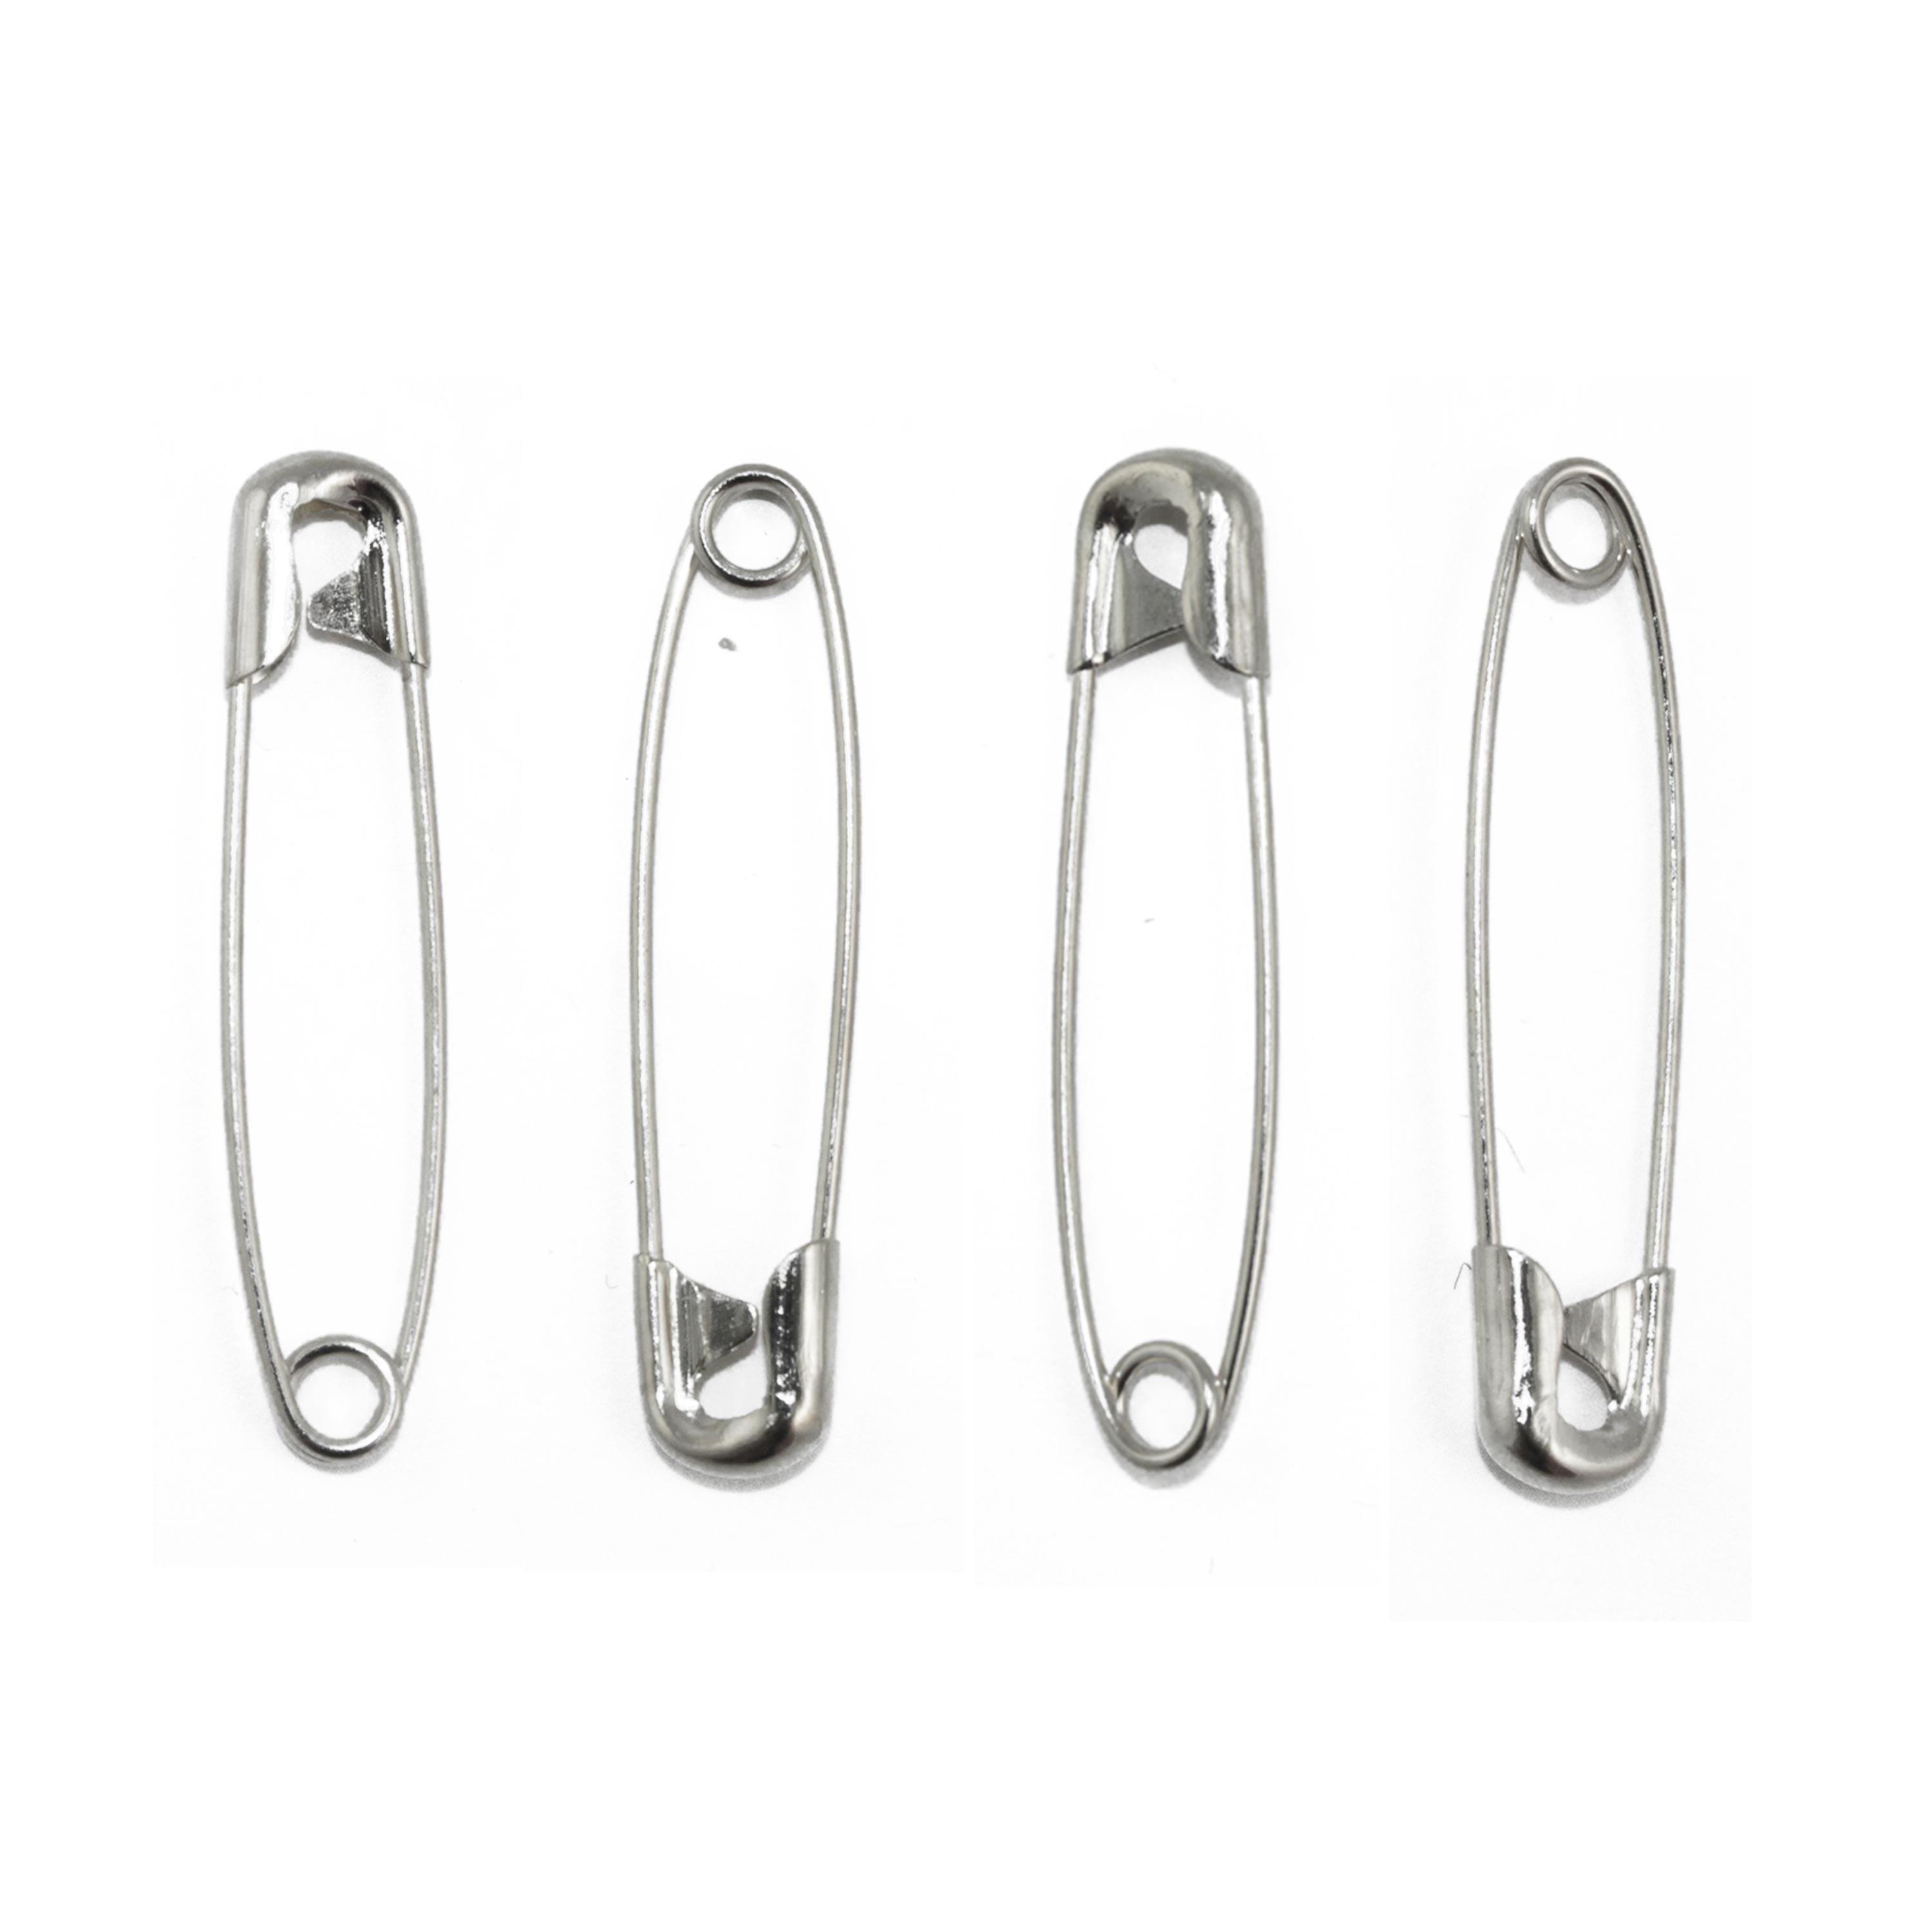 250 Pieces 6 Sizes Safety Pins Large And Small Safety Pins Durable